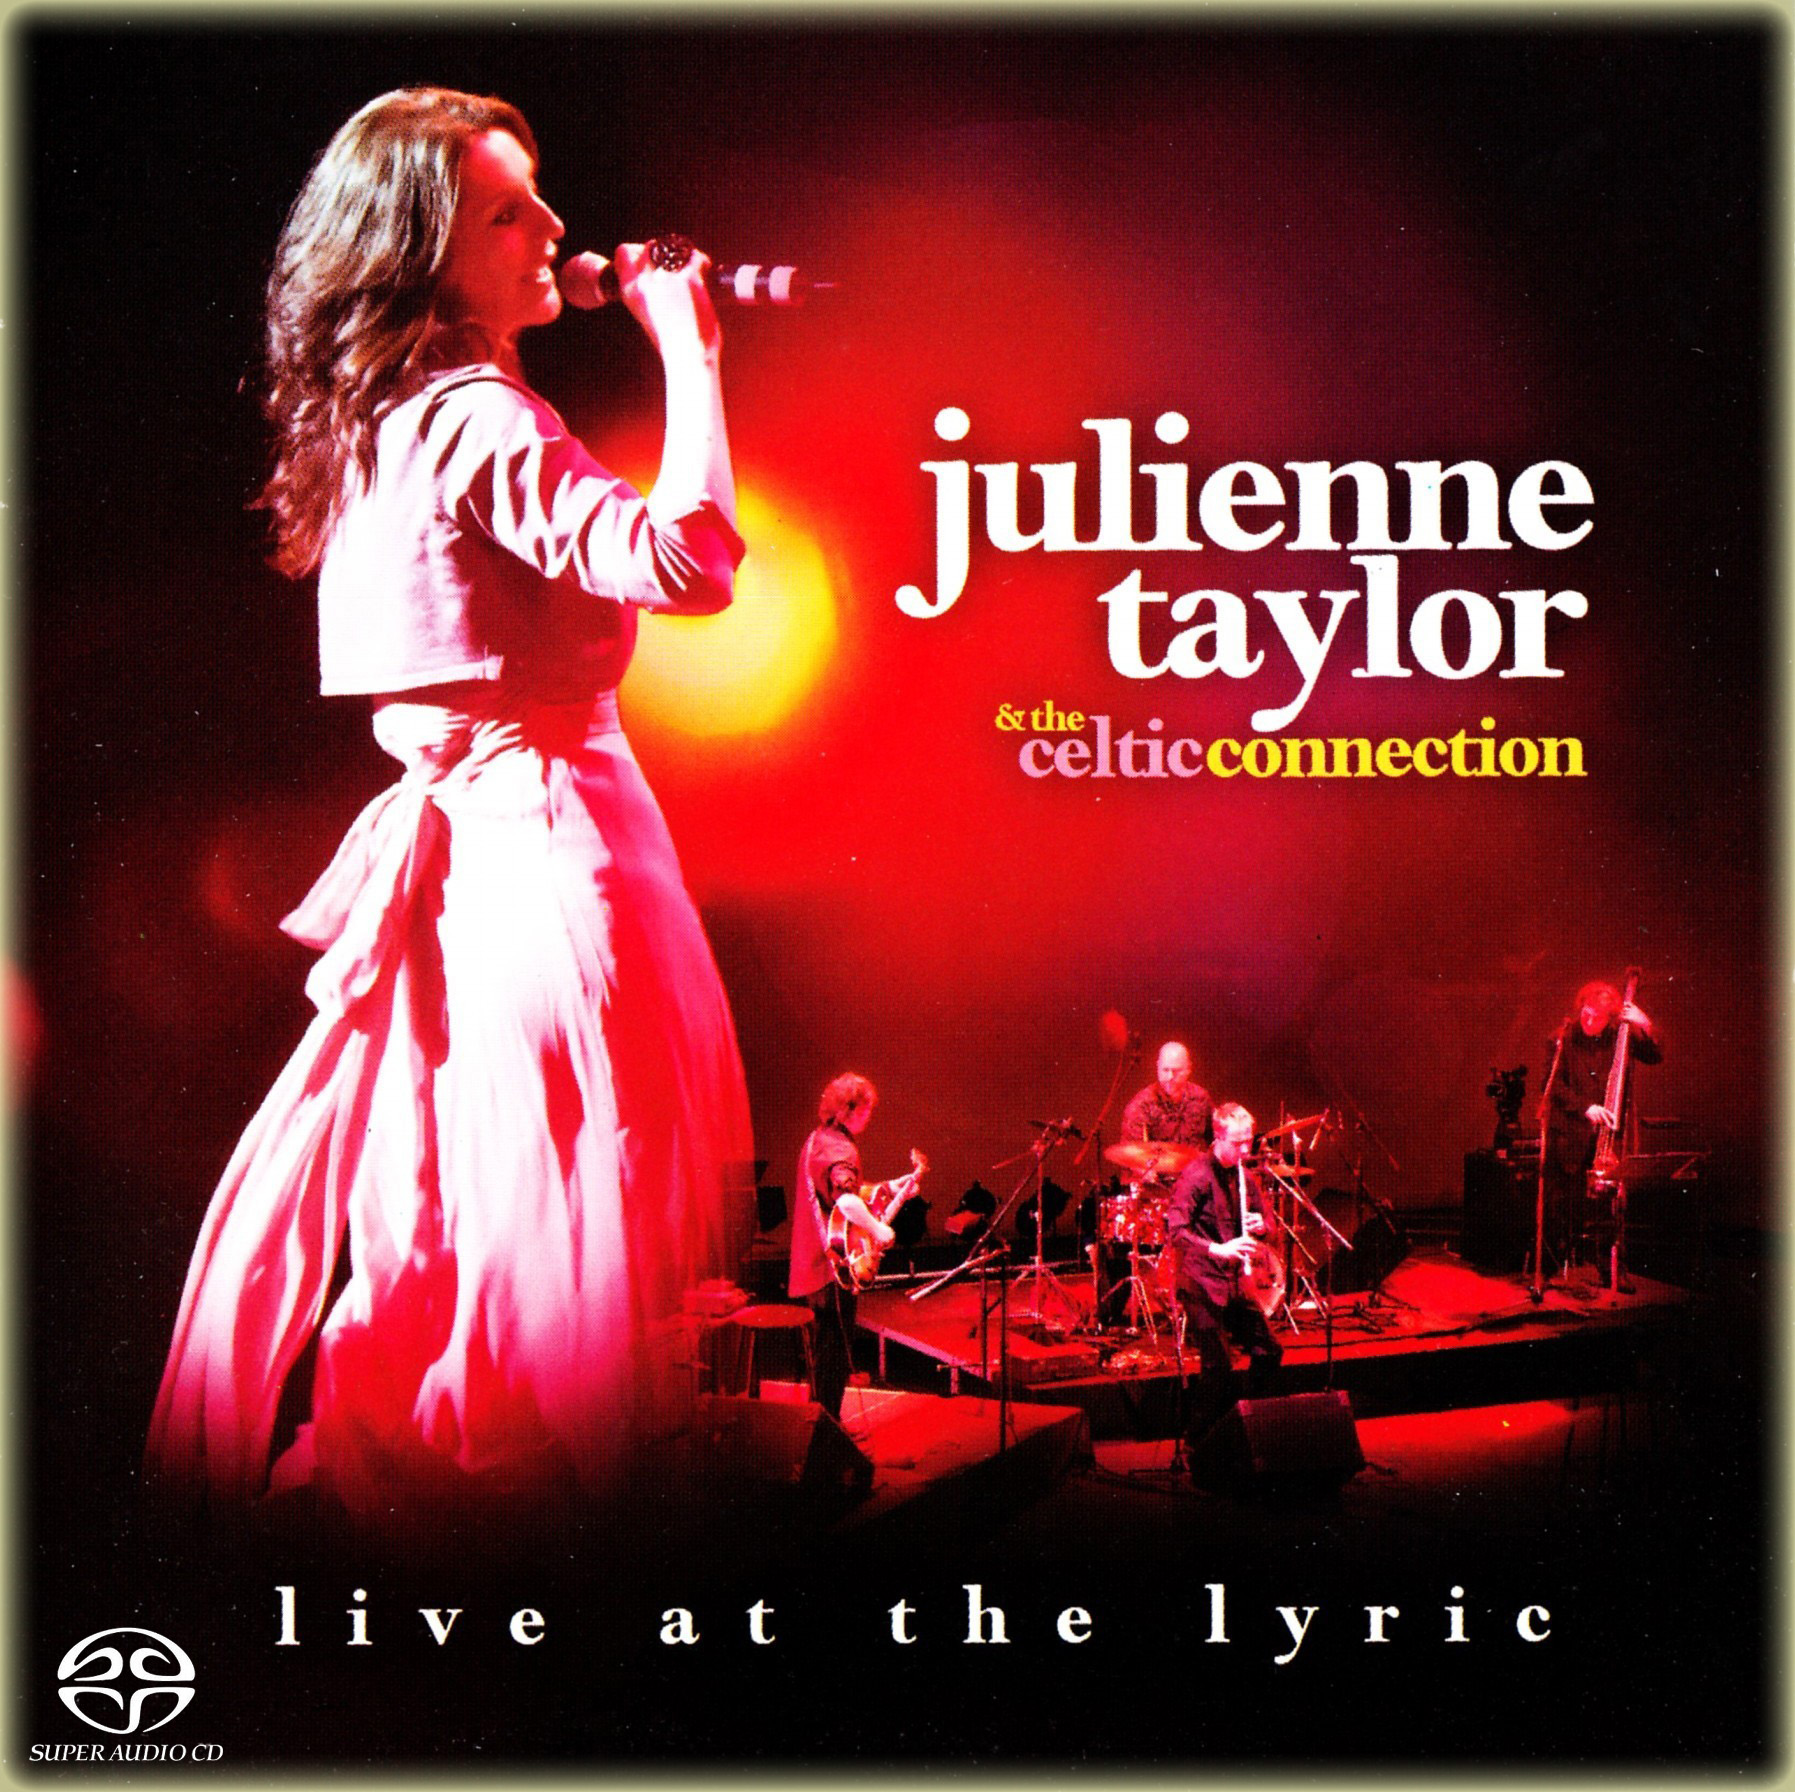 Julienne Taylor & The Celtic Connection - Live At The Lyric (2012) MCH SACD ISO